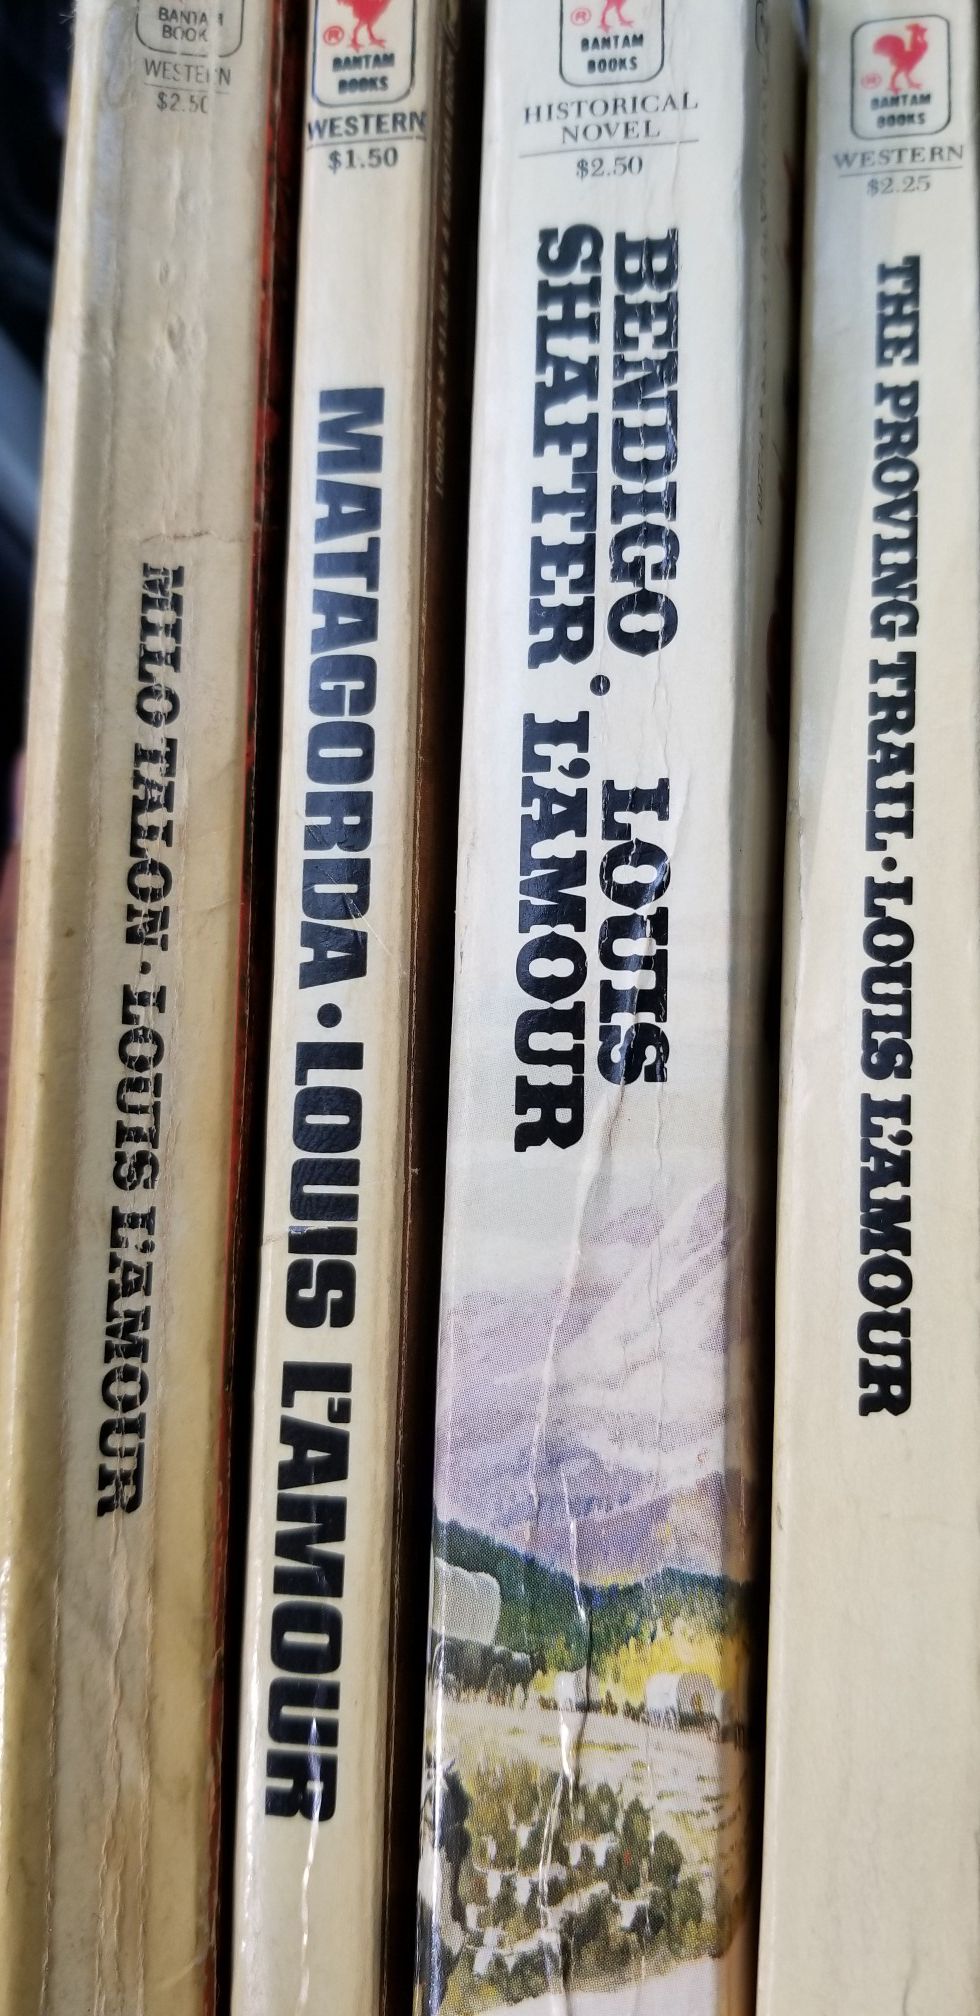 Louis L'Amour Western Books - Books, Movies & Music, Facebook Marketplace